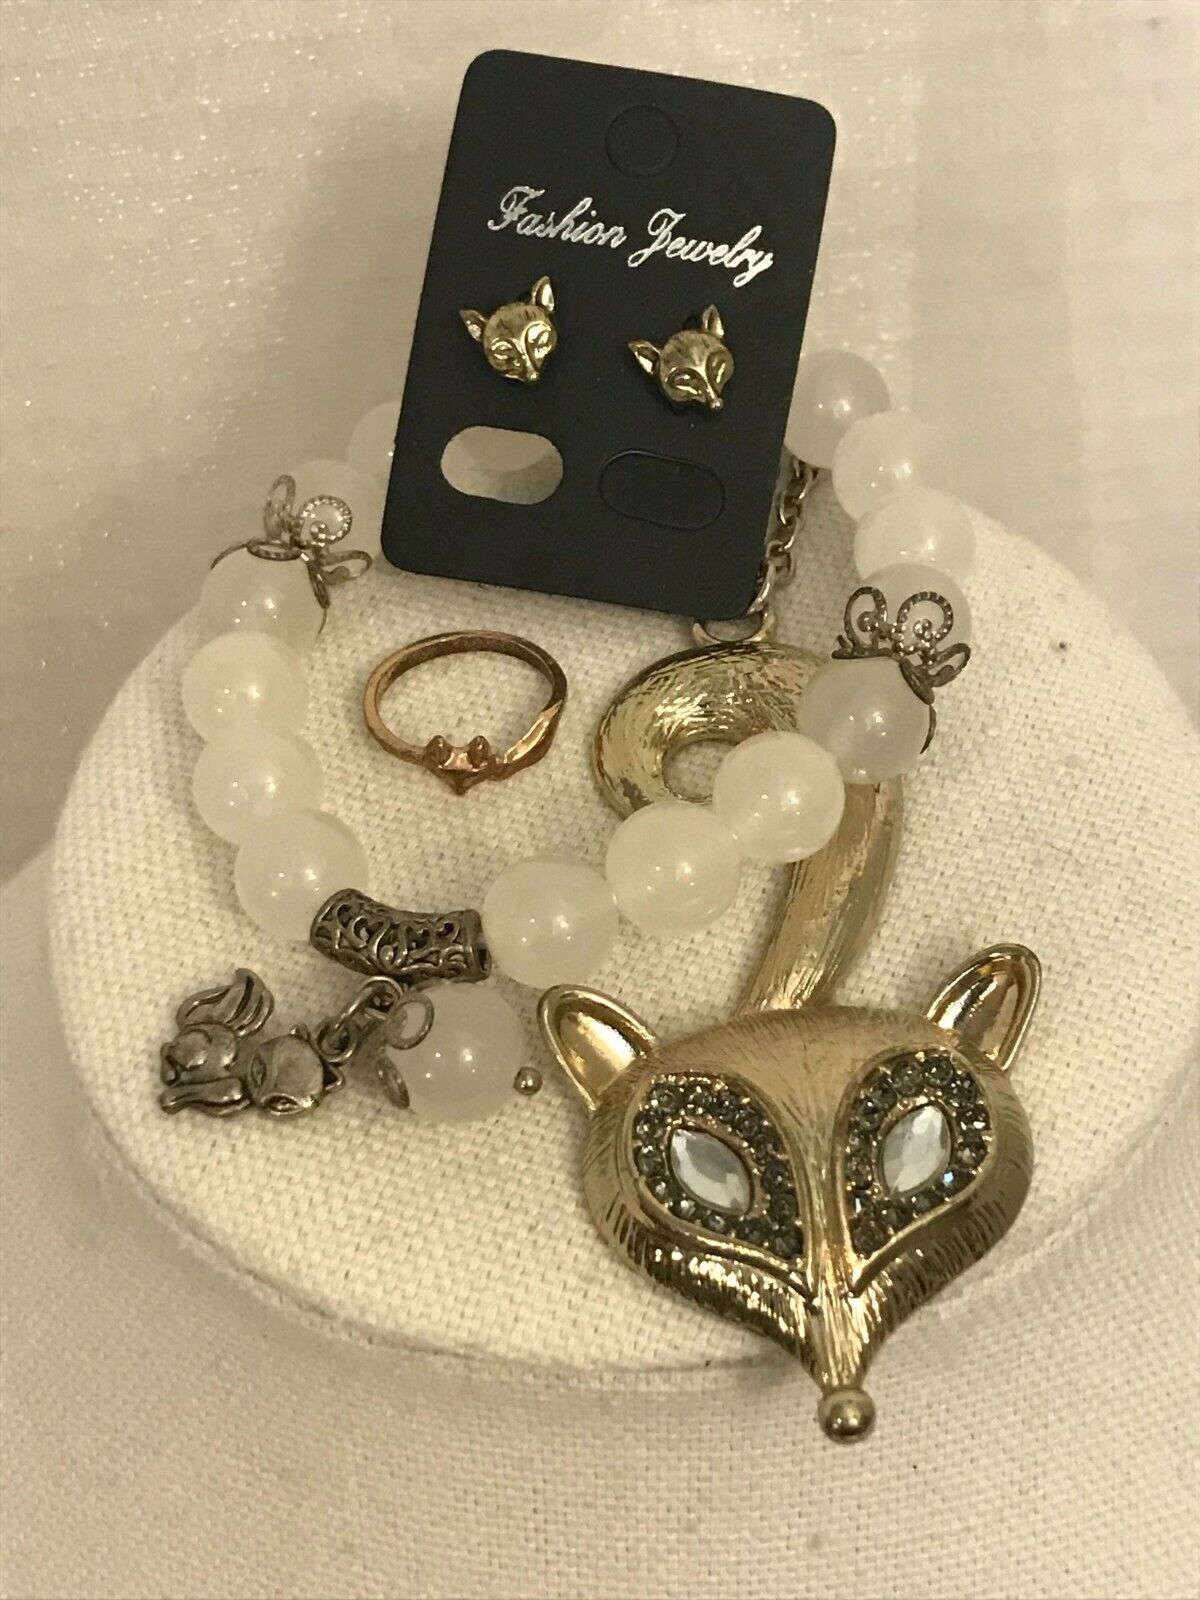 Vintage Fox Jewelry Bracelet Necklace Ring Earrings Collection Animal Foxy Unbranded